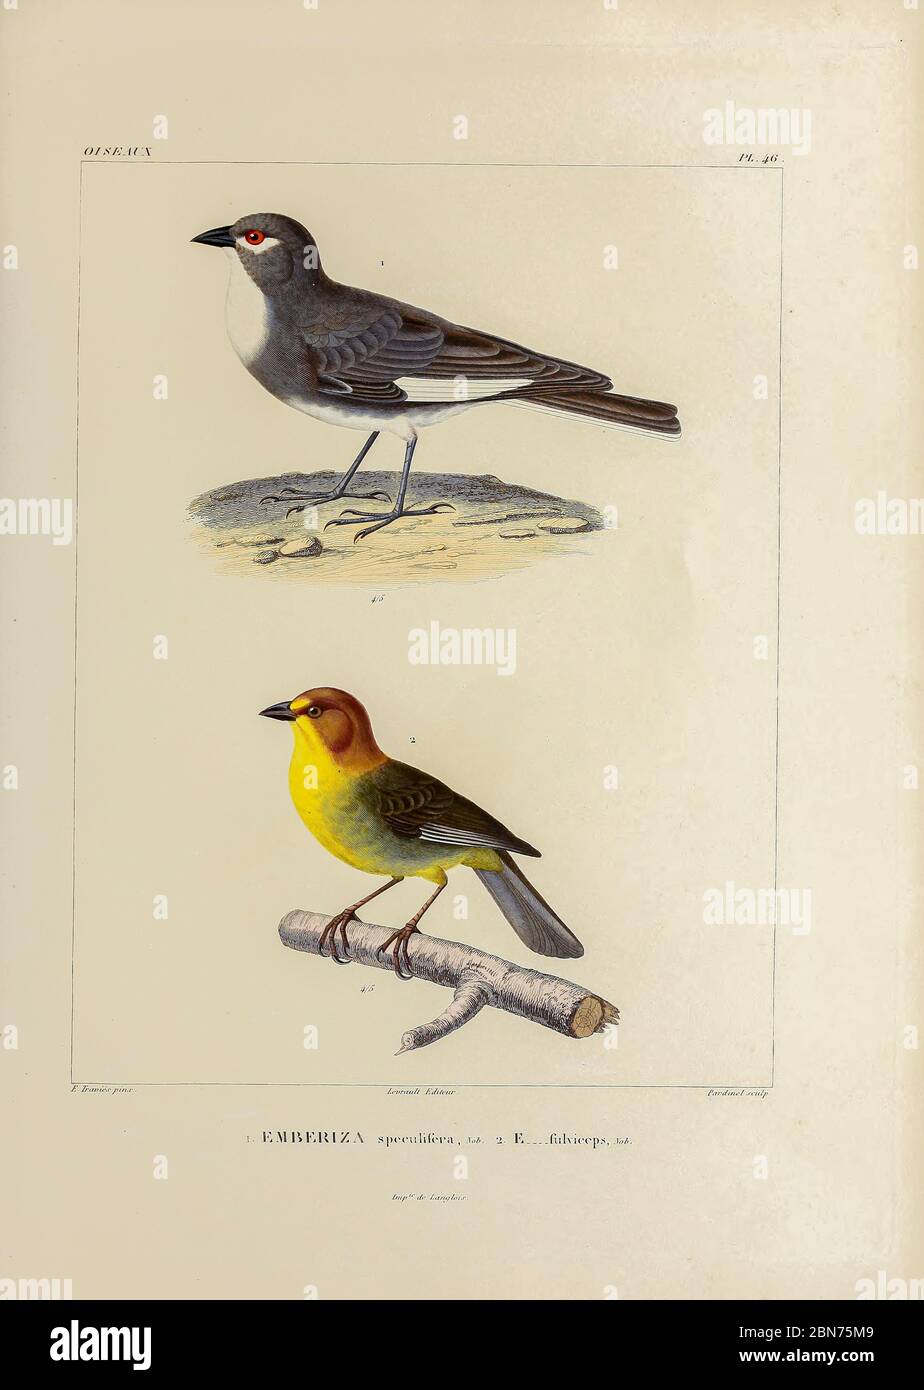 hand coloured sketch Top: white-winged diuca finch (Diuca speculifera [Here as Emberiza speculifera]) Bottom: fulvous-headed brush finch (Atlapetes fulviceps [Here as Emberiza fulviceps]) From the book 'Voyage dans l'Amérique Méridionale' [Journey to South America: (Brazil, the eastern republic of Uruguay, the Argentine Republic, Patagonia, the republic of Chile, the republic of Bolivia, the republic of Peru), executed during the years 1826 - 1833] 4th volume Part 3 By: Orbigny, Alcide Dessalines d', d'Orbigny, 1802-1857; Montagne, Jean François Camille, 1784-1866; Martius, Karl Friedrich Phi Stock Photo